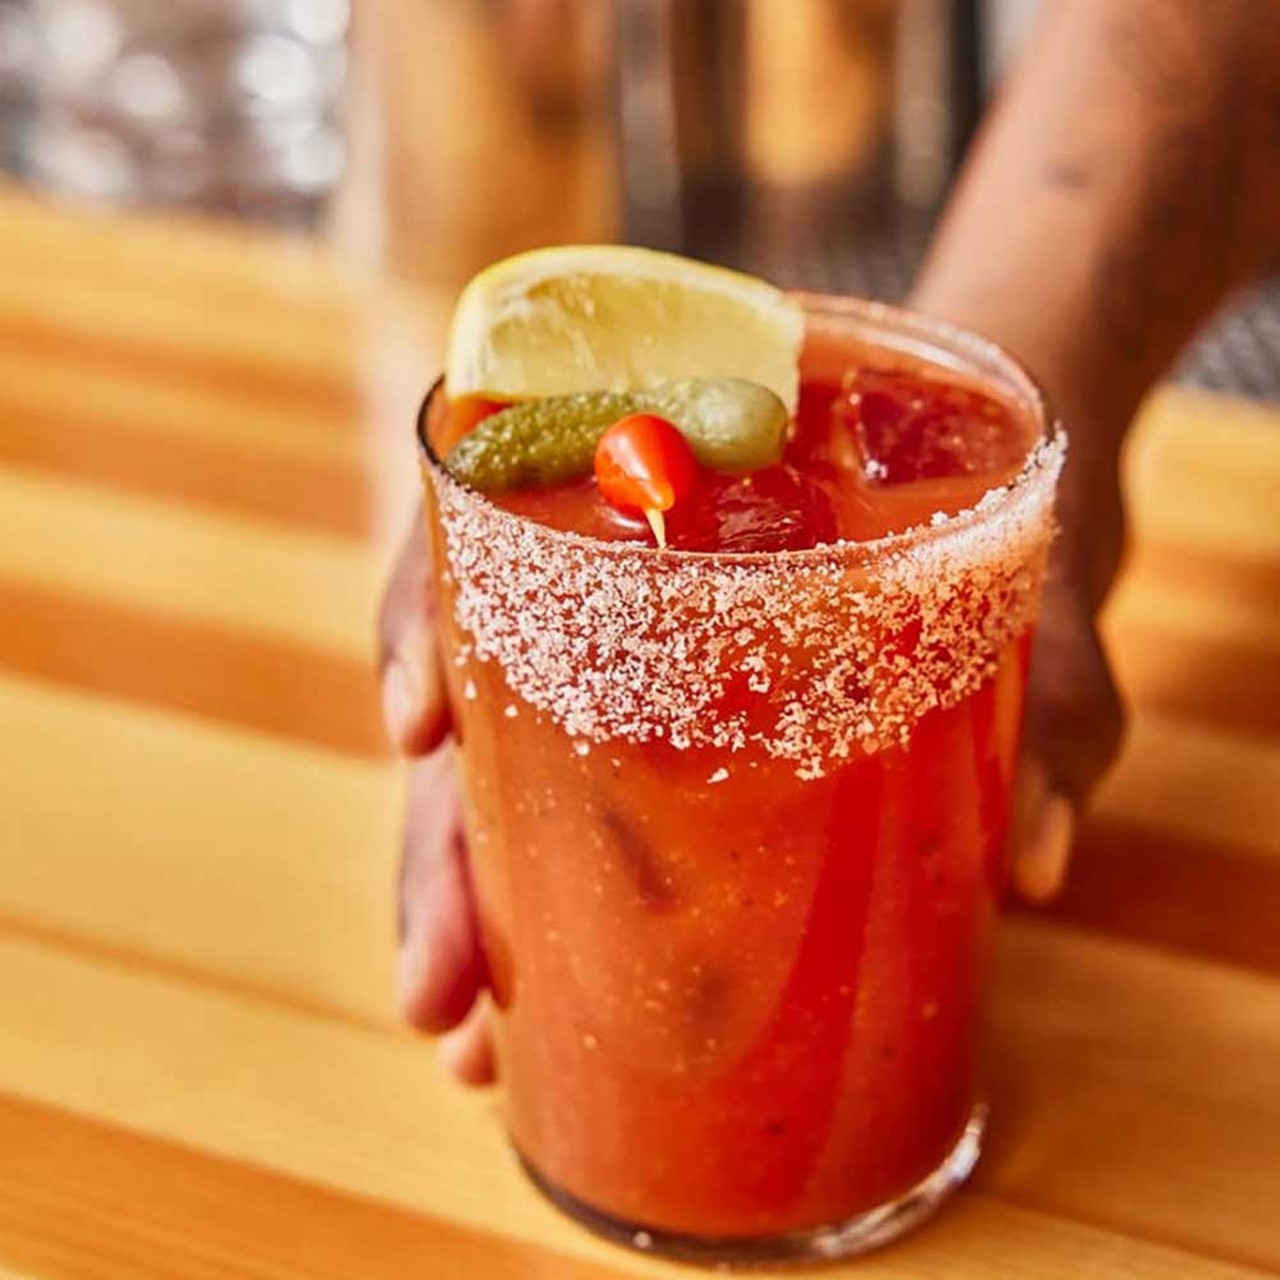 A Bloody Mary.